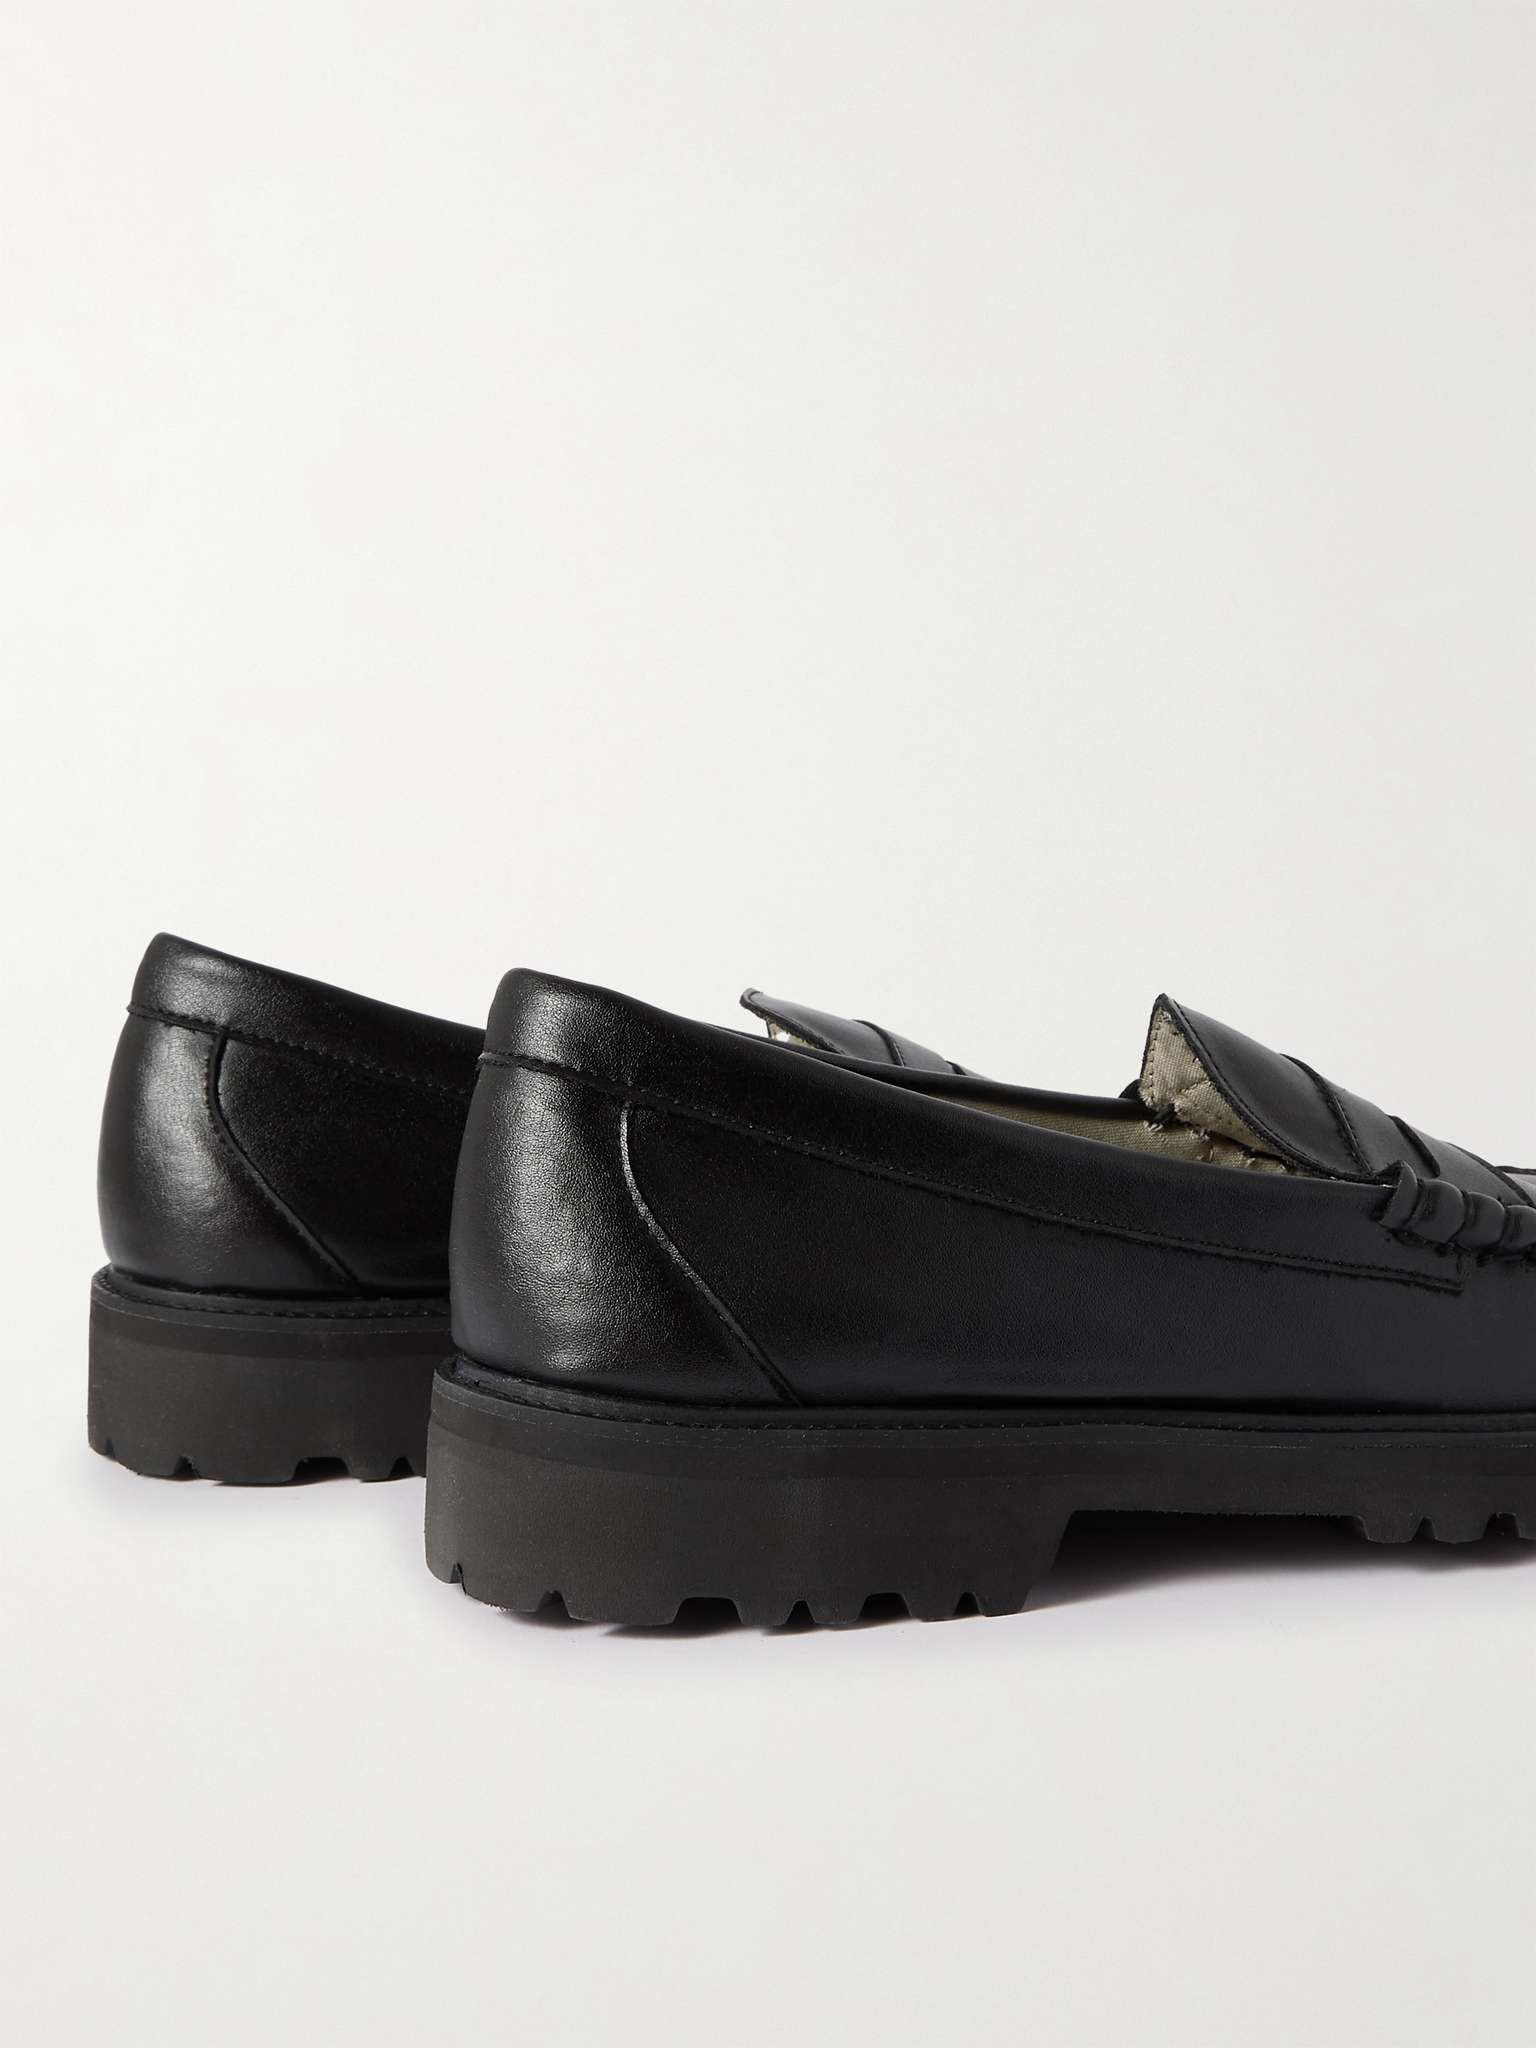 G.H. BASS & CO. Weejun 90 Cactus Leather Penny Loafers for Men | MR PORTER